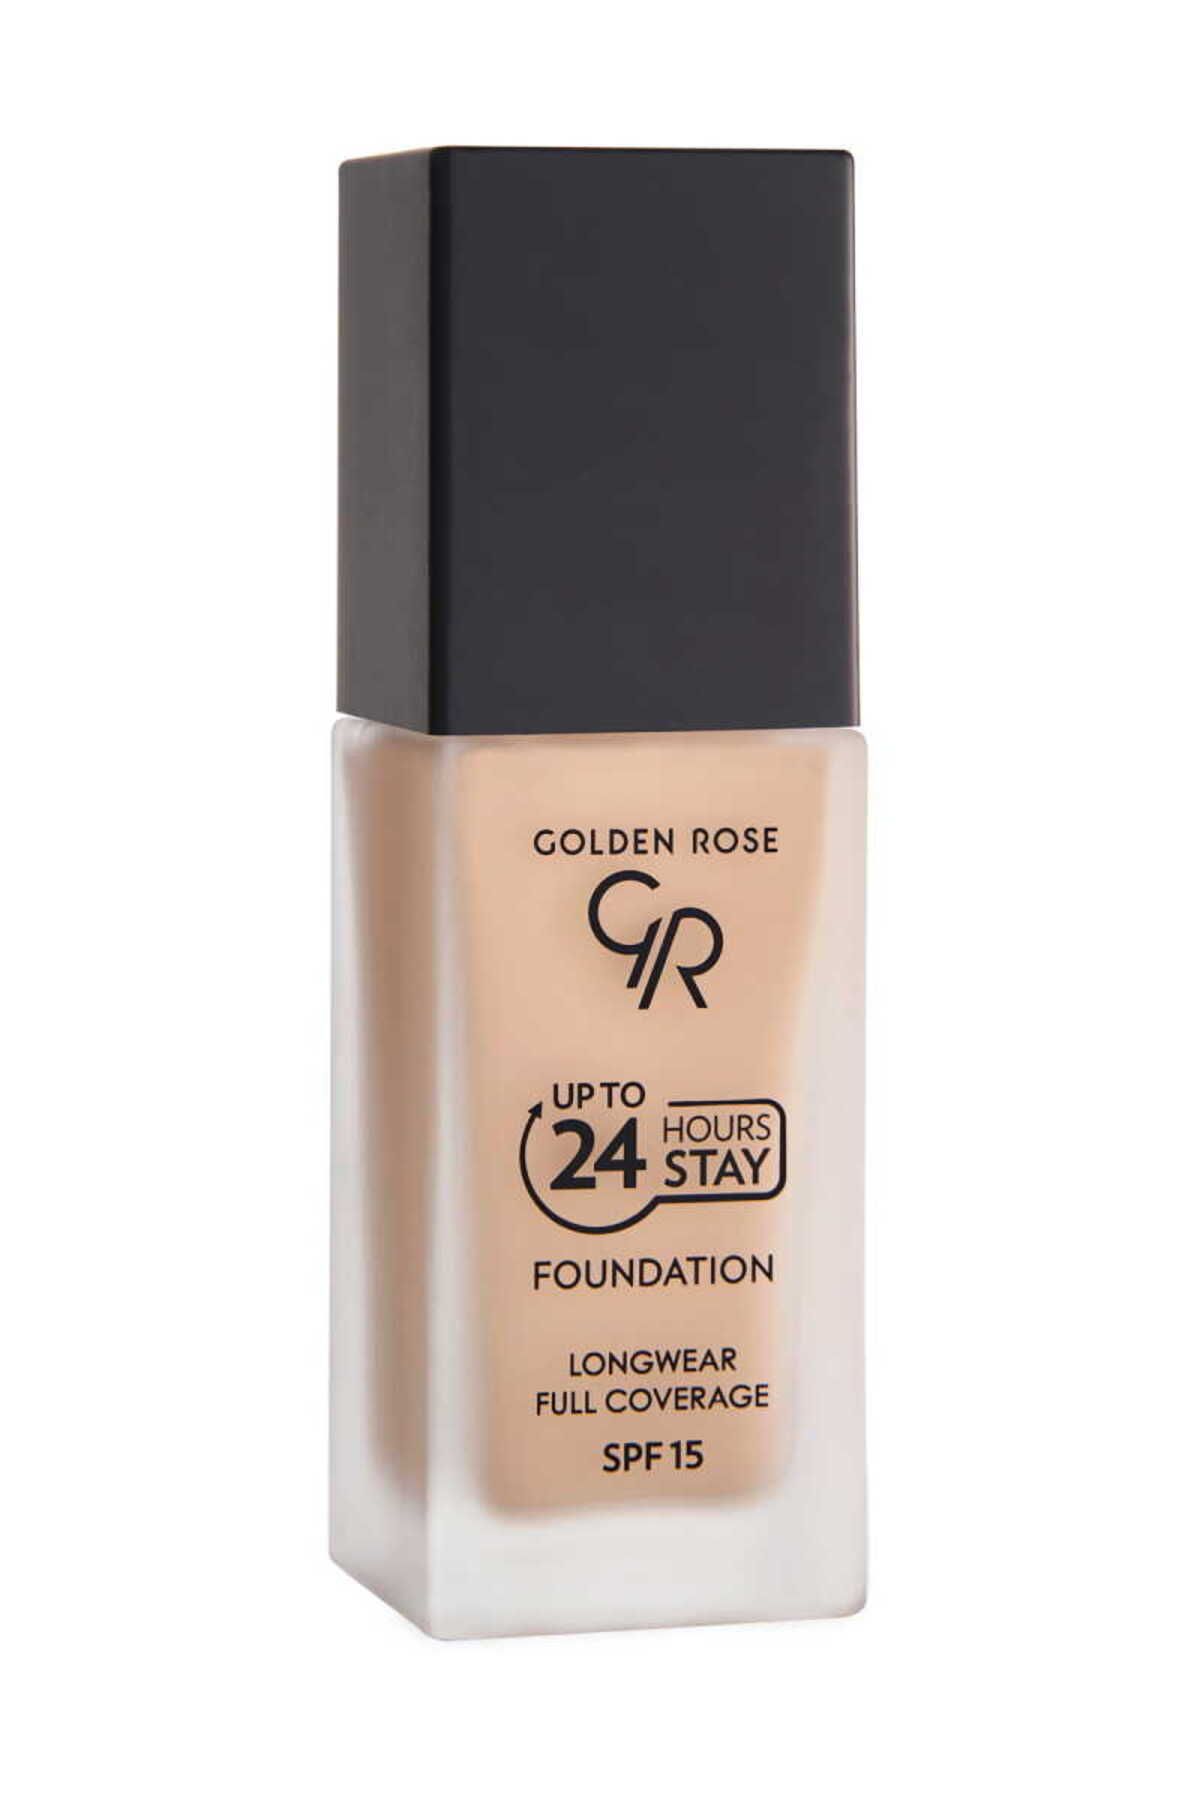 Golden Rose Up To 24 Hours Stay Foundation 10